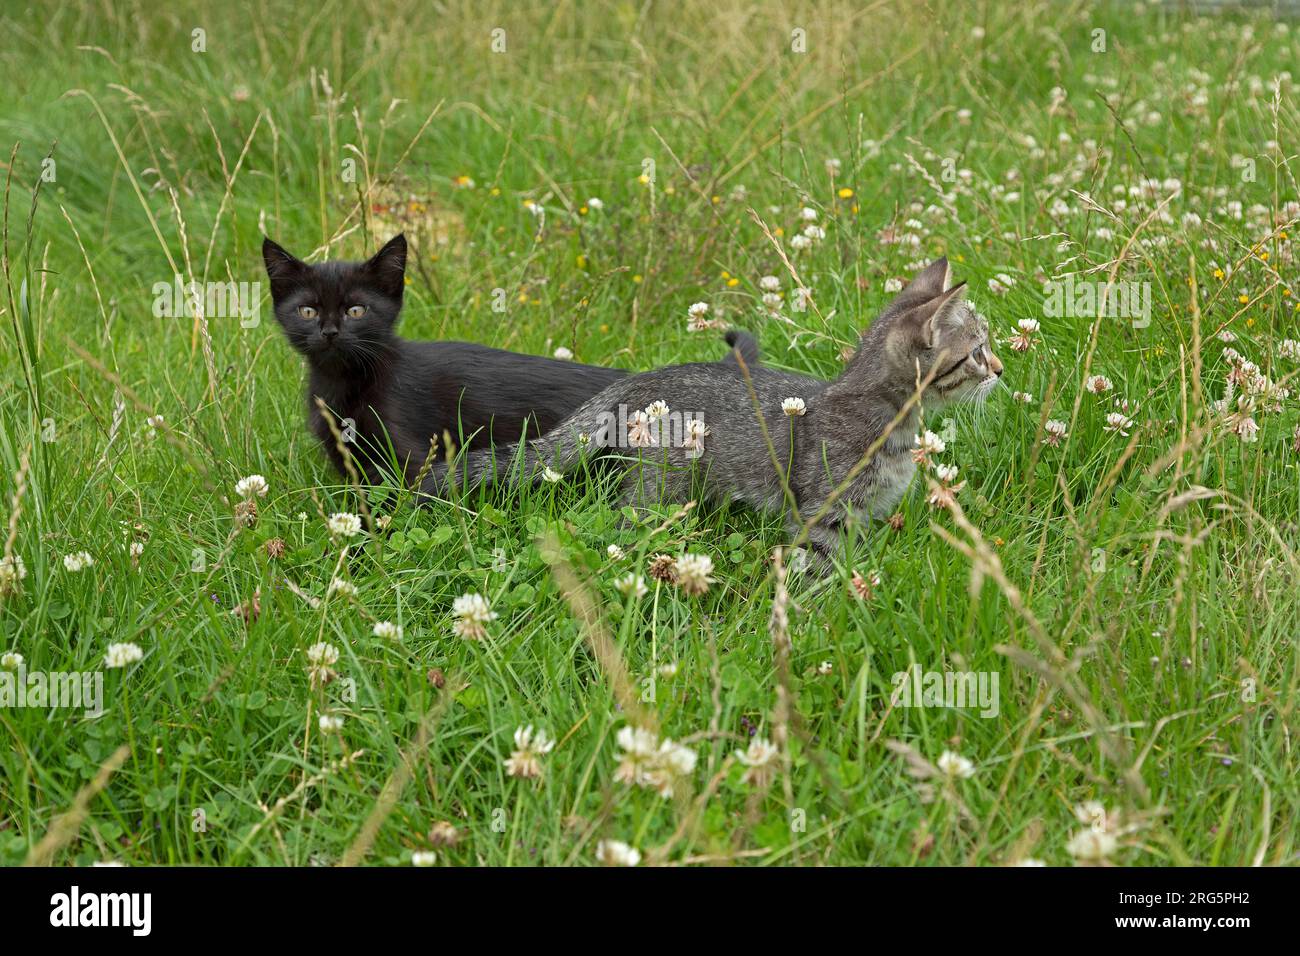 Two nine weeks old kittens sitting in grass together, Germany Stock Photo